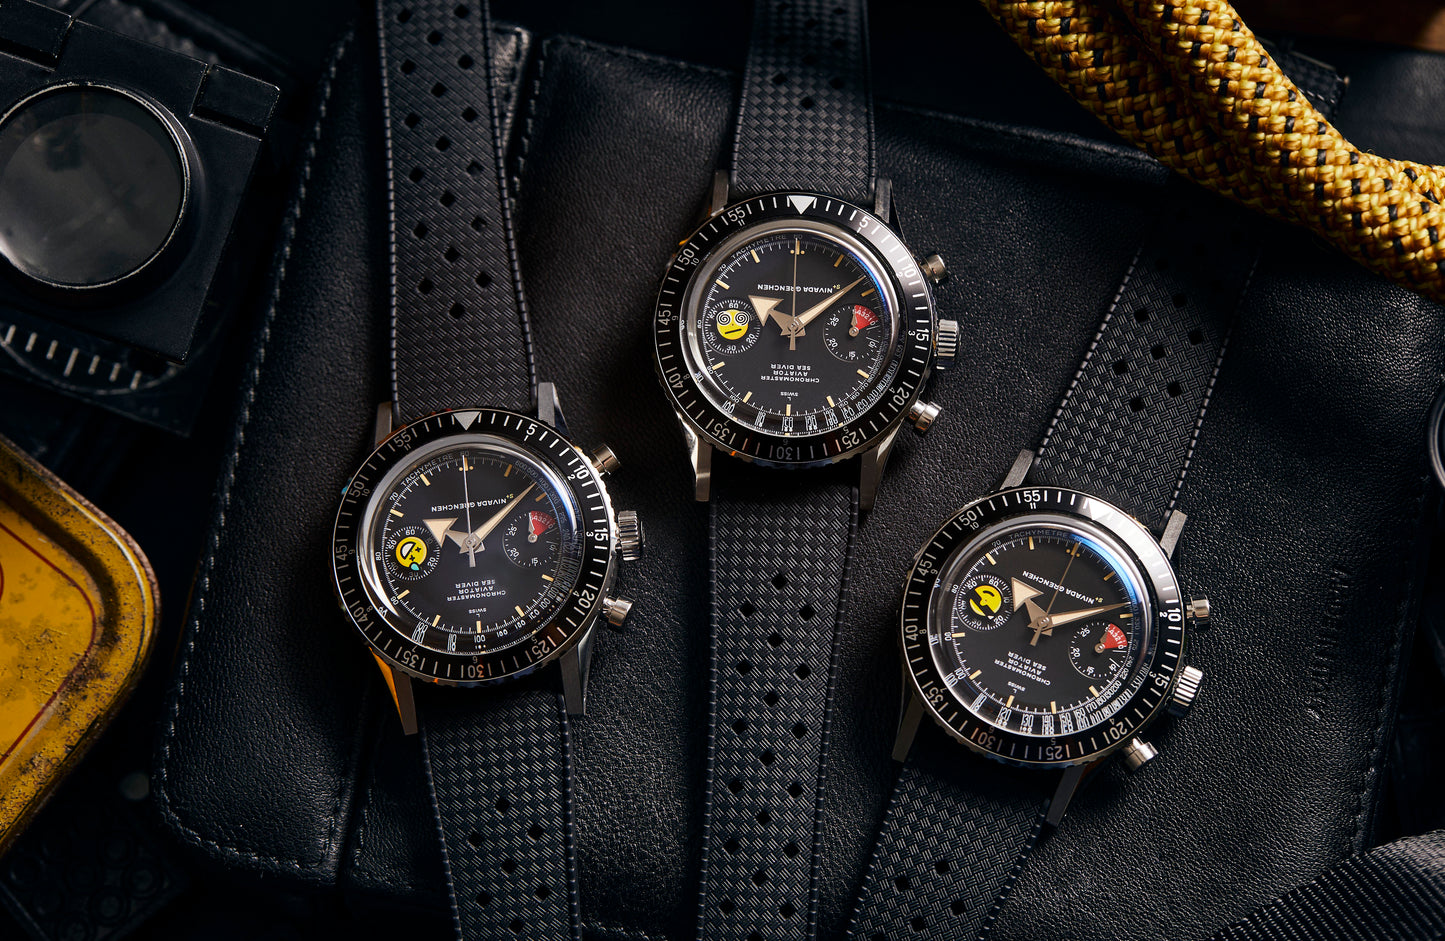 Nivada Grenchen x Time+Tide x seconde/seconde/ ChaosMaster "Smiley" Limited Edition